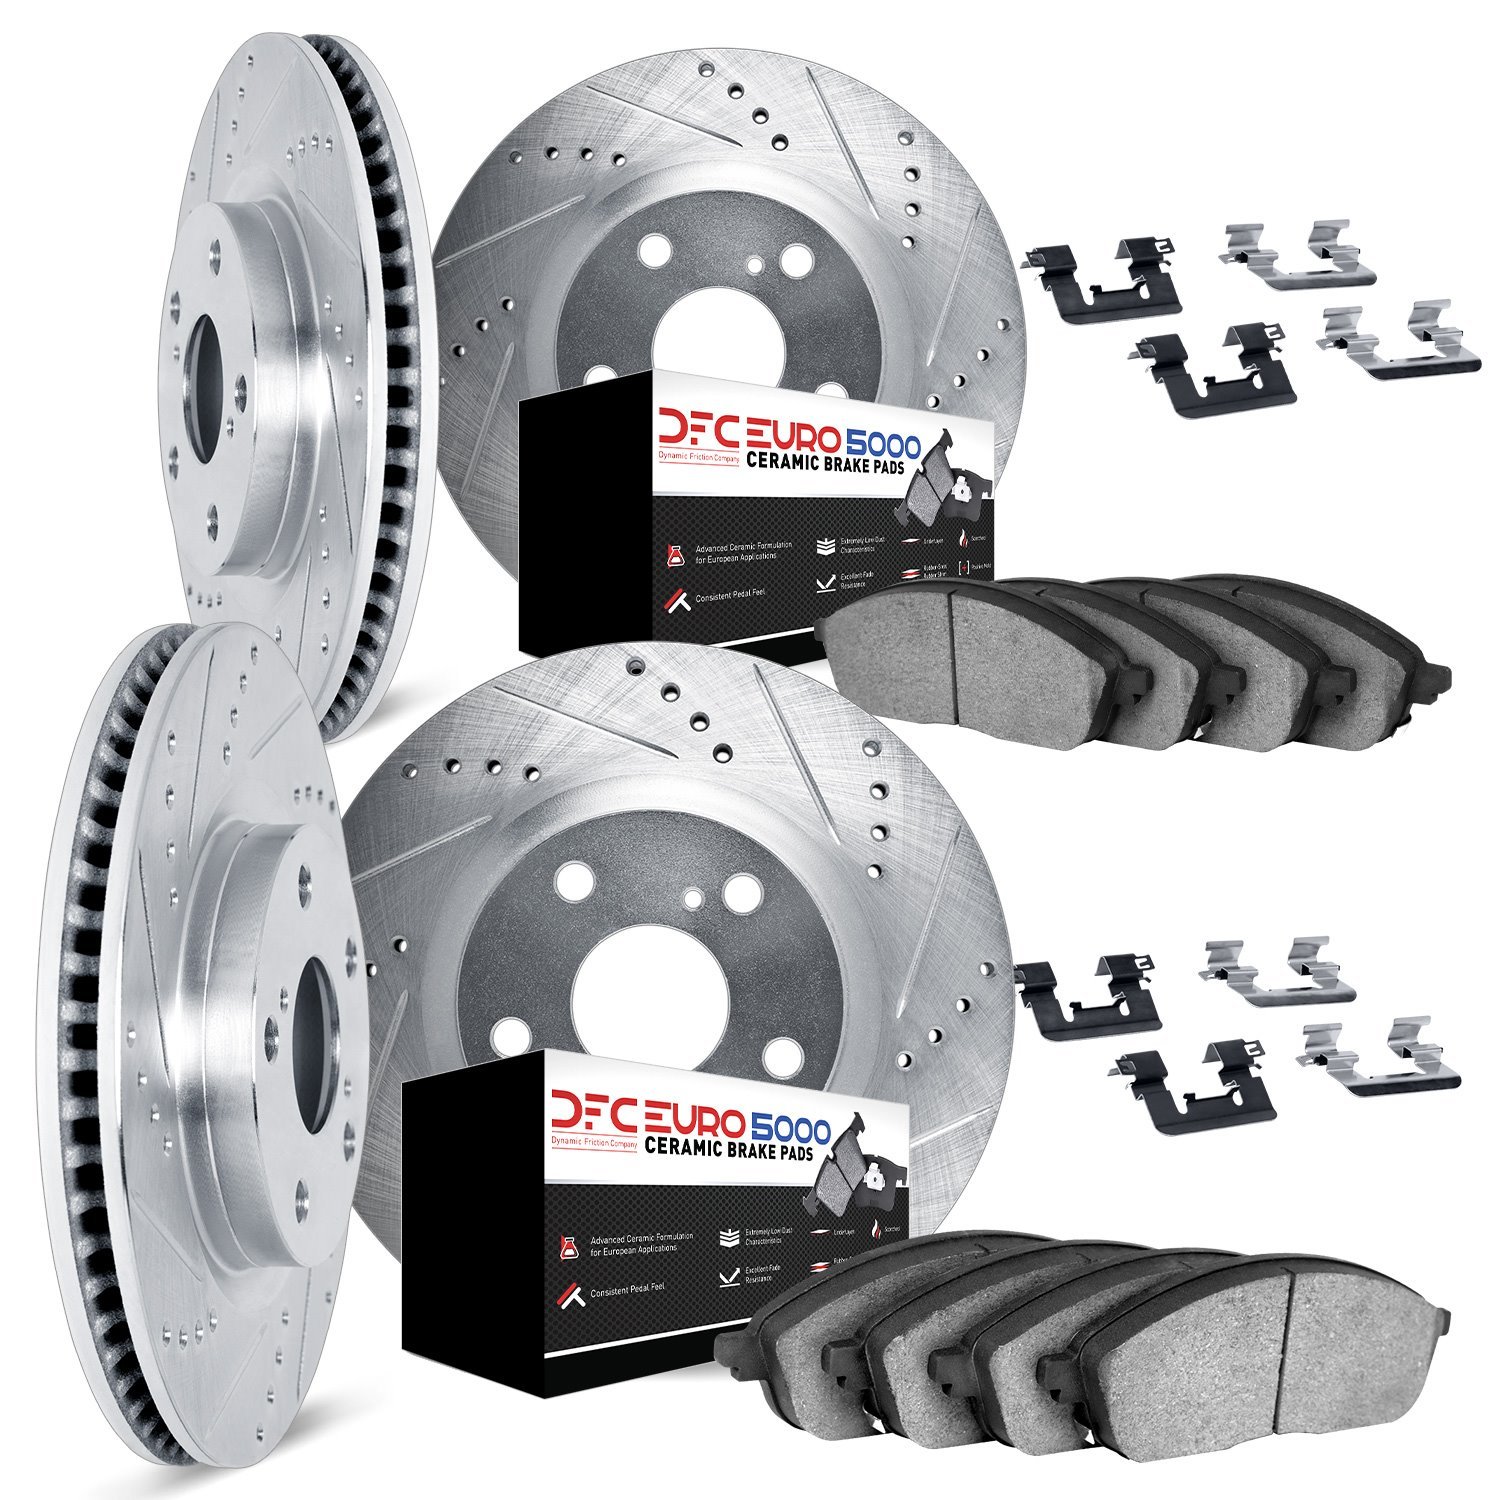 7614-31025 Drilled/Slotted Brake Rotors w/5000 Euro Ceramic Brake Pads Kit & Hardware [Silver], 2013-2013 BMW, Position: Front a